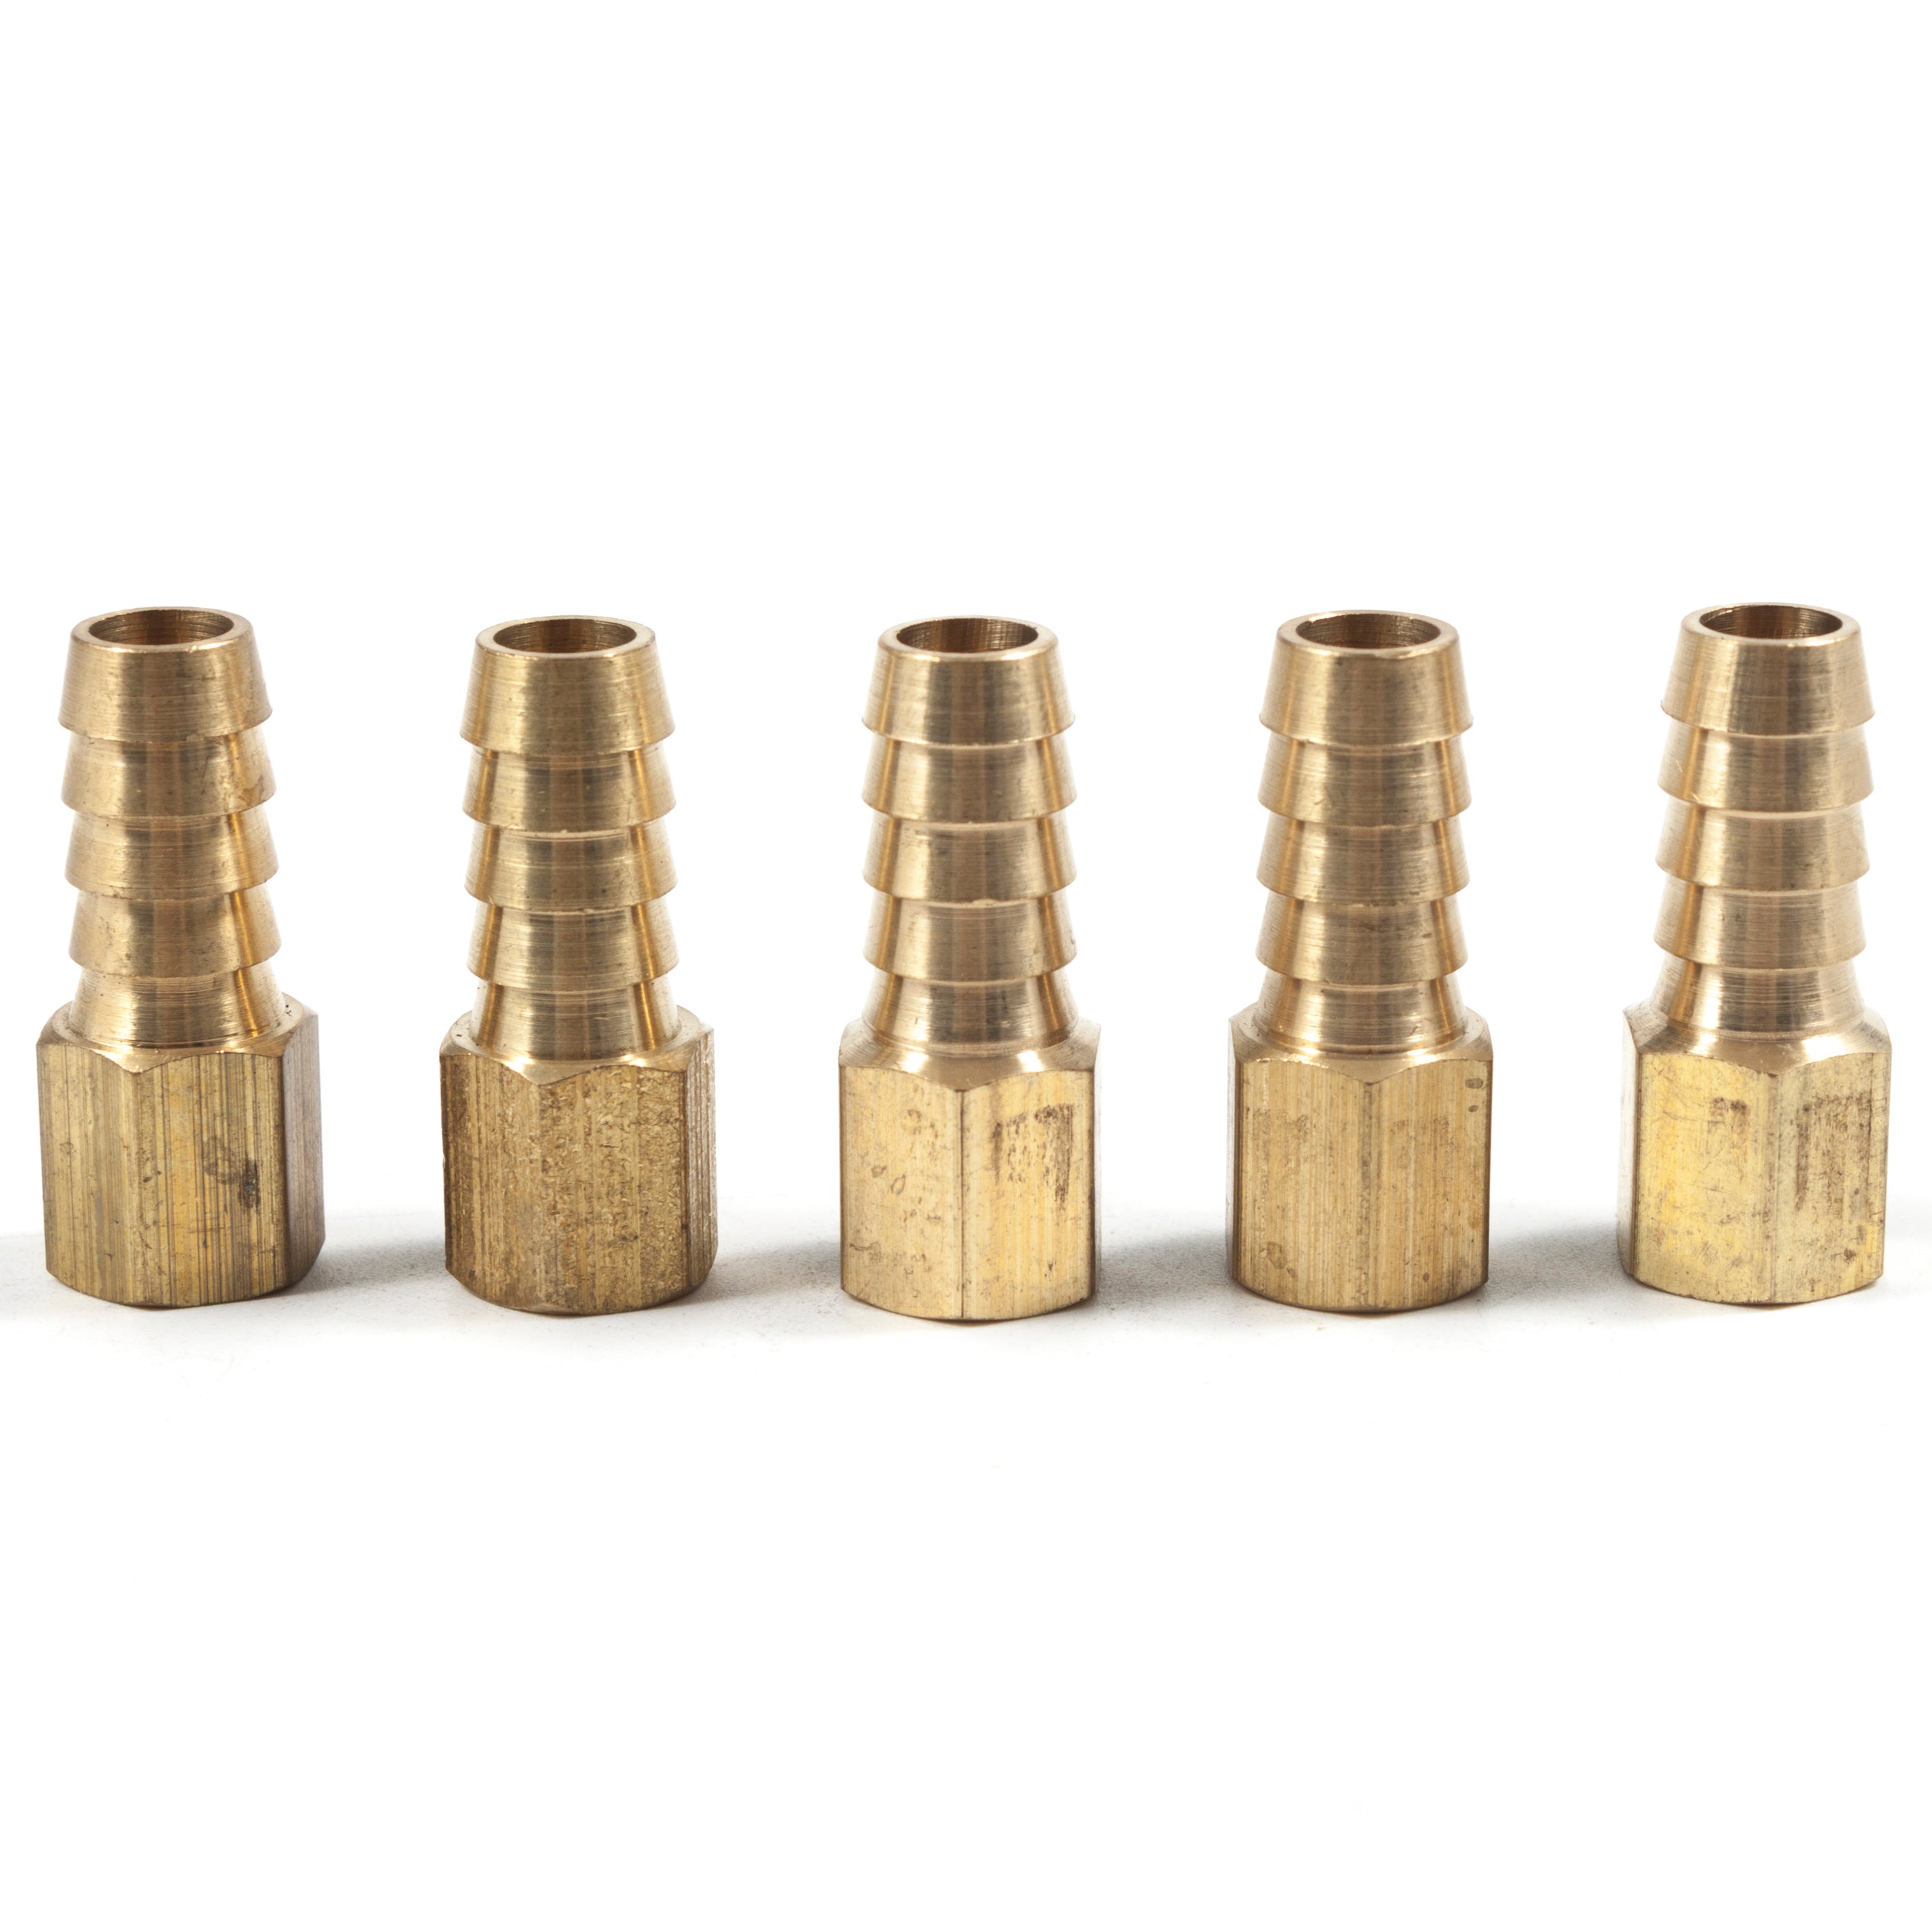 LTWFITTING Brass Fitting Coupler 3/8-Inch Hose Barb x 1/8-Inch Female NPT Fuel Water Boat(Pack of 5)